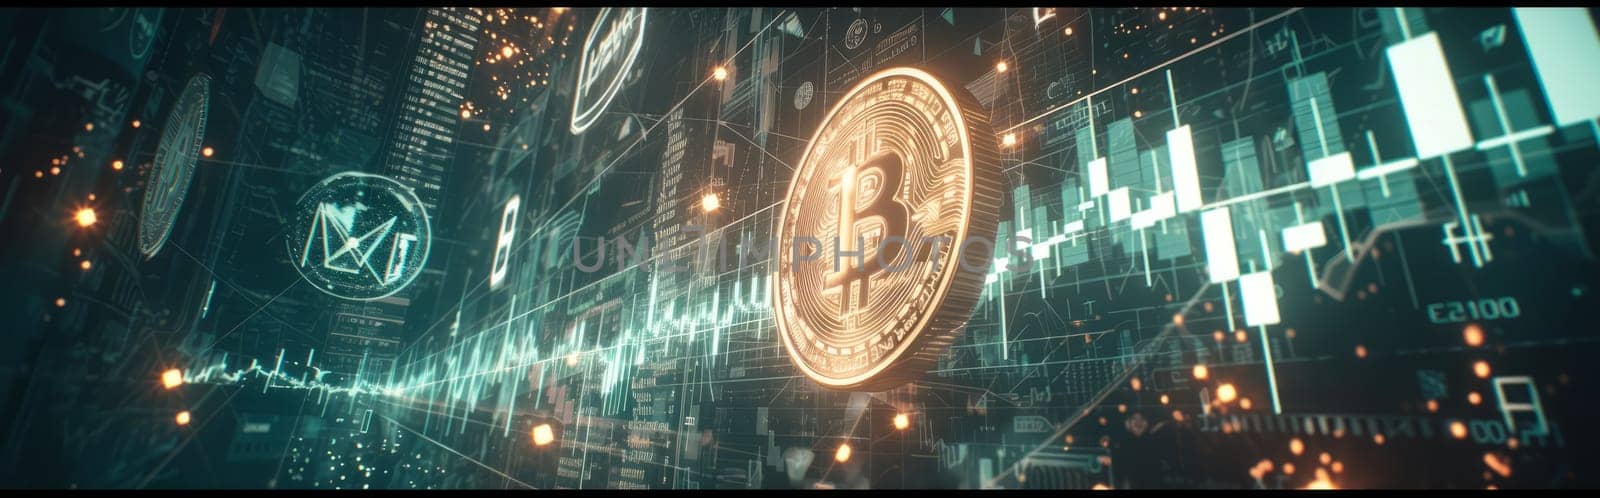 Bitcoin Cryptocurrency Business Background. Global Exchange and Winner Strategy Concept. Technology and Cyberspace Bitcoin Conceptual Image. by iliris